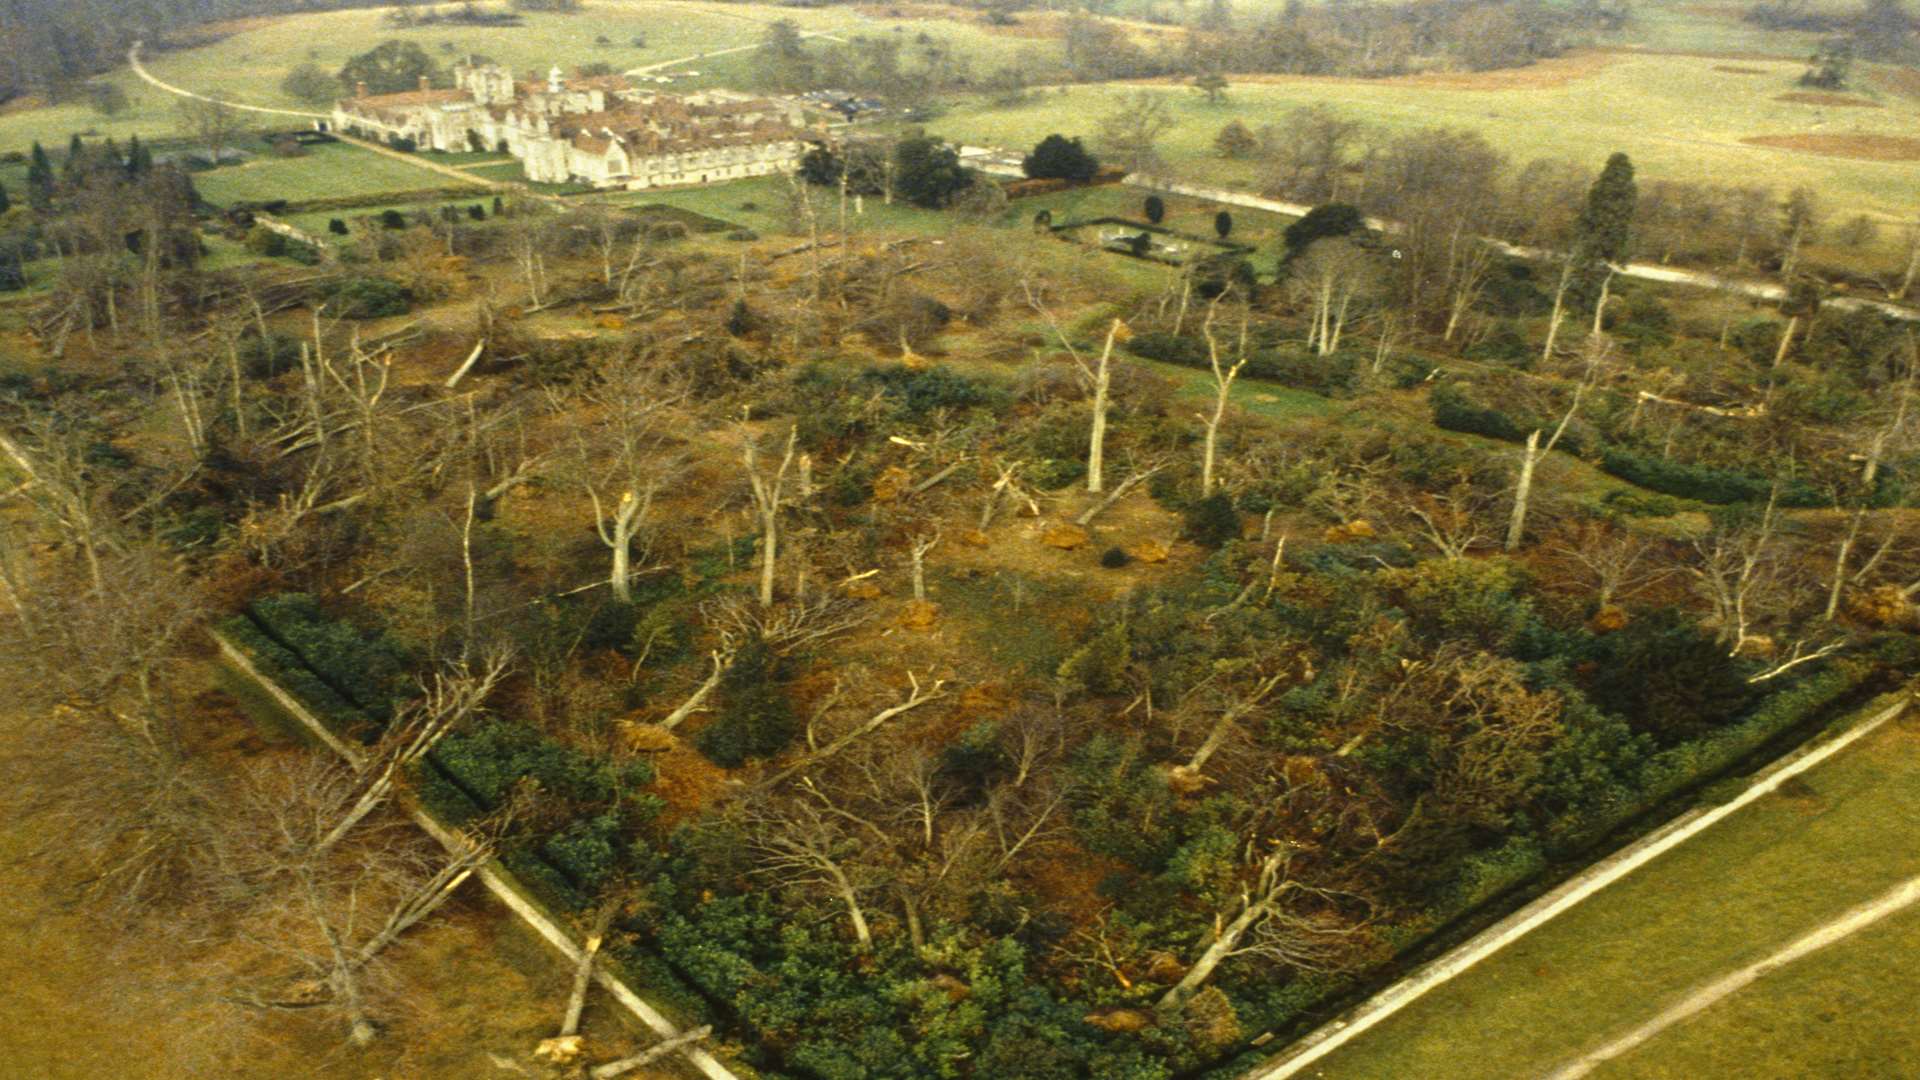 Damage to woodland at the Great Storm in Knole, Sevenoaks. Pic: National Trust